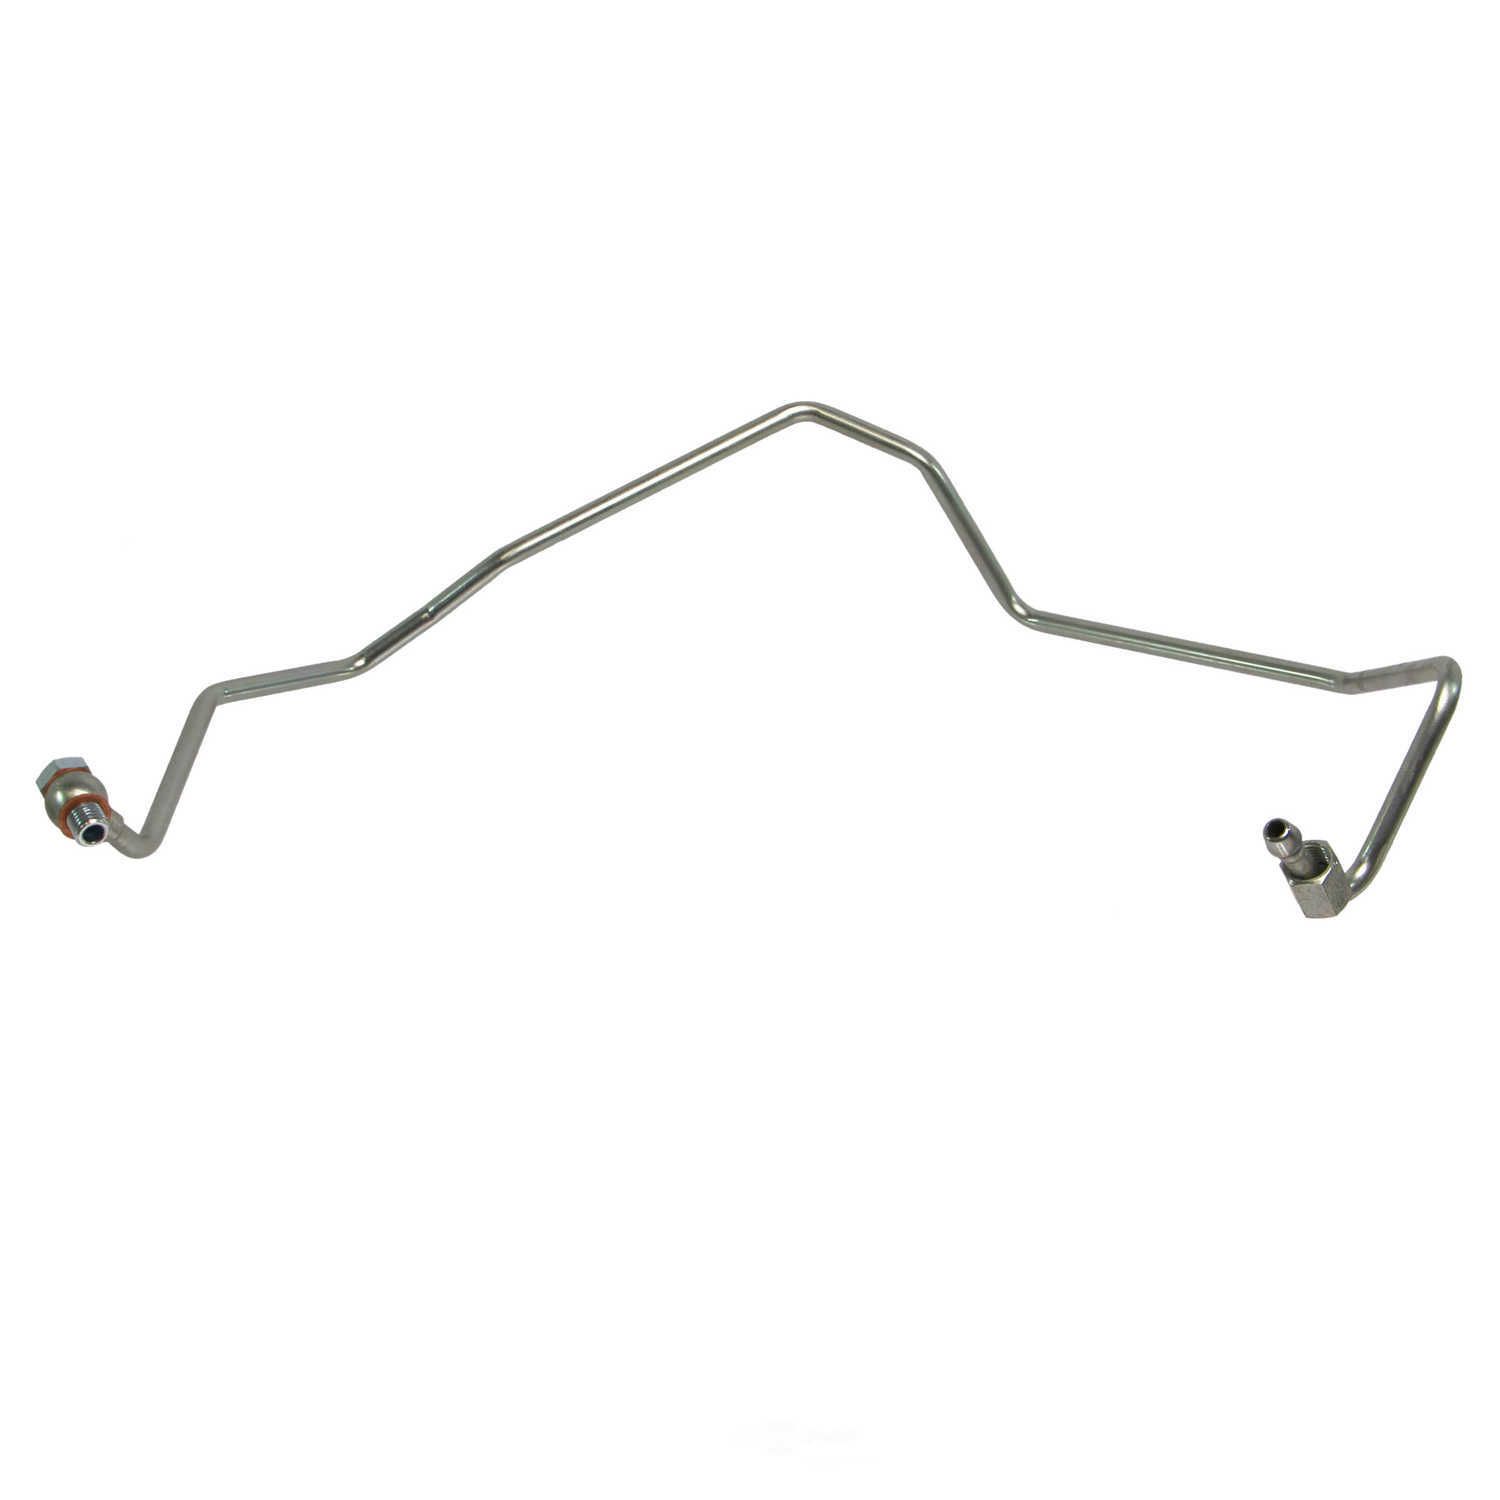 CRP/REIN - Turbocharger Oil Supply Line - CPD TFP0009